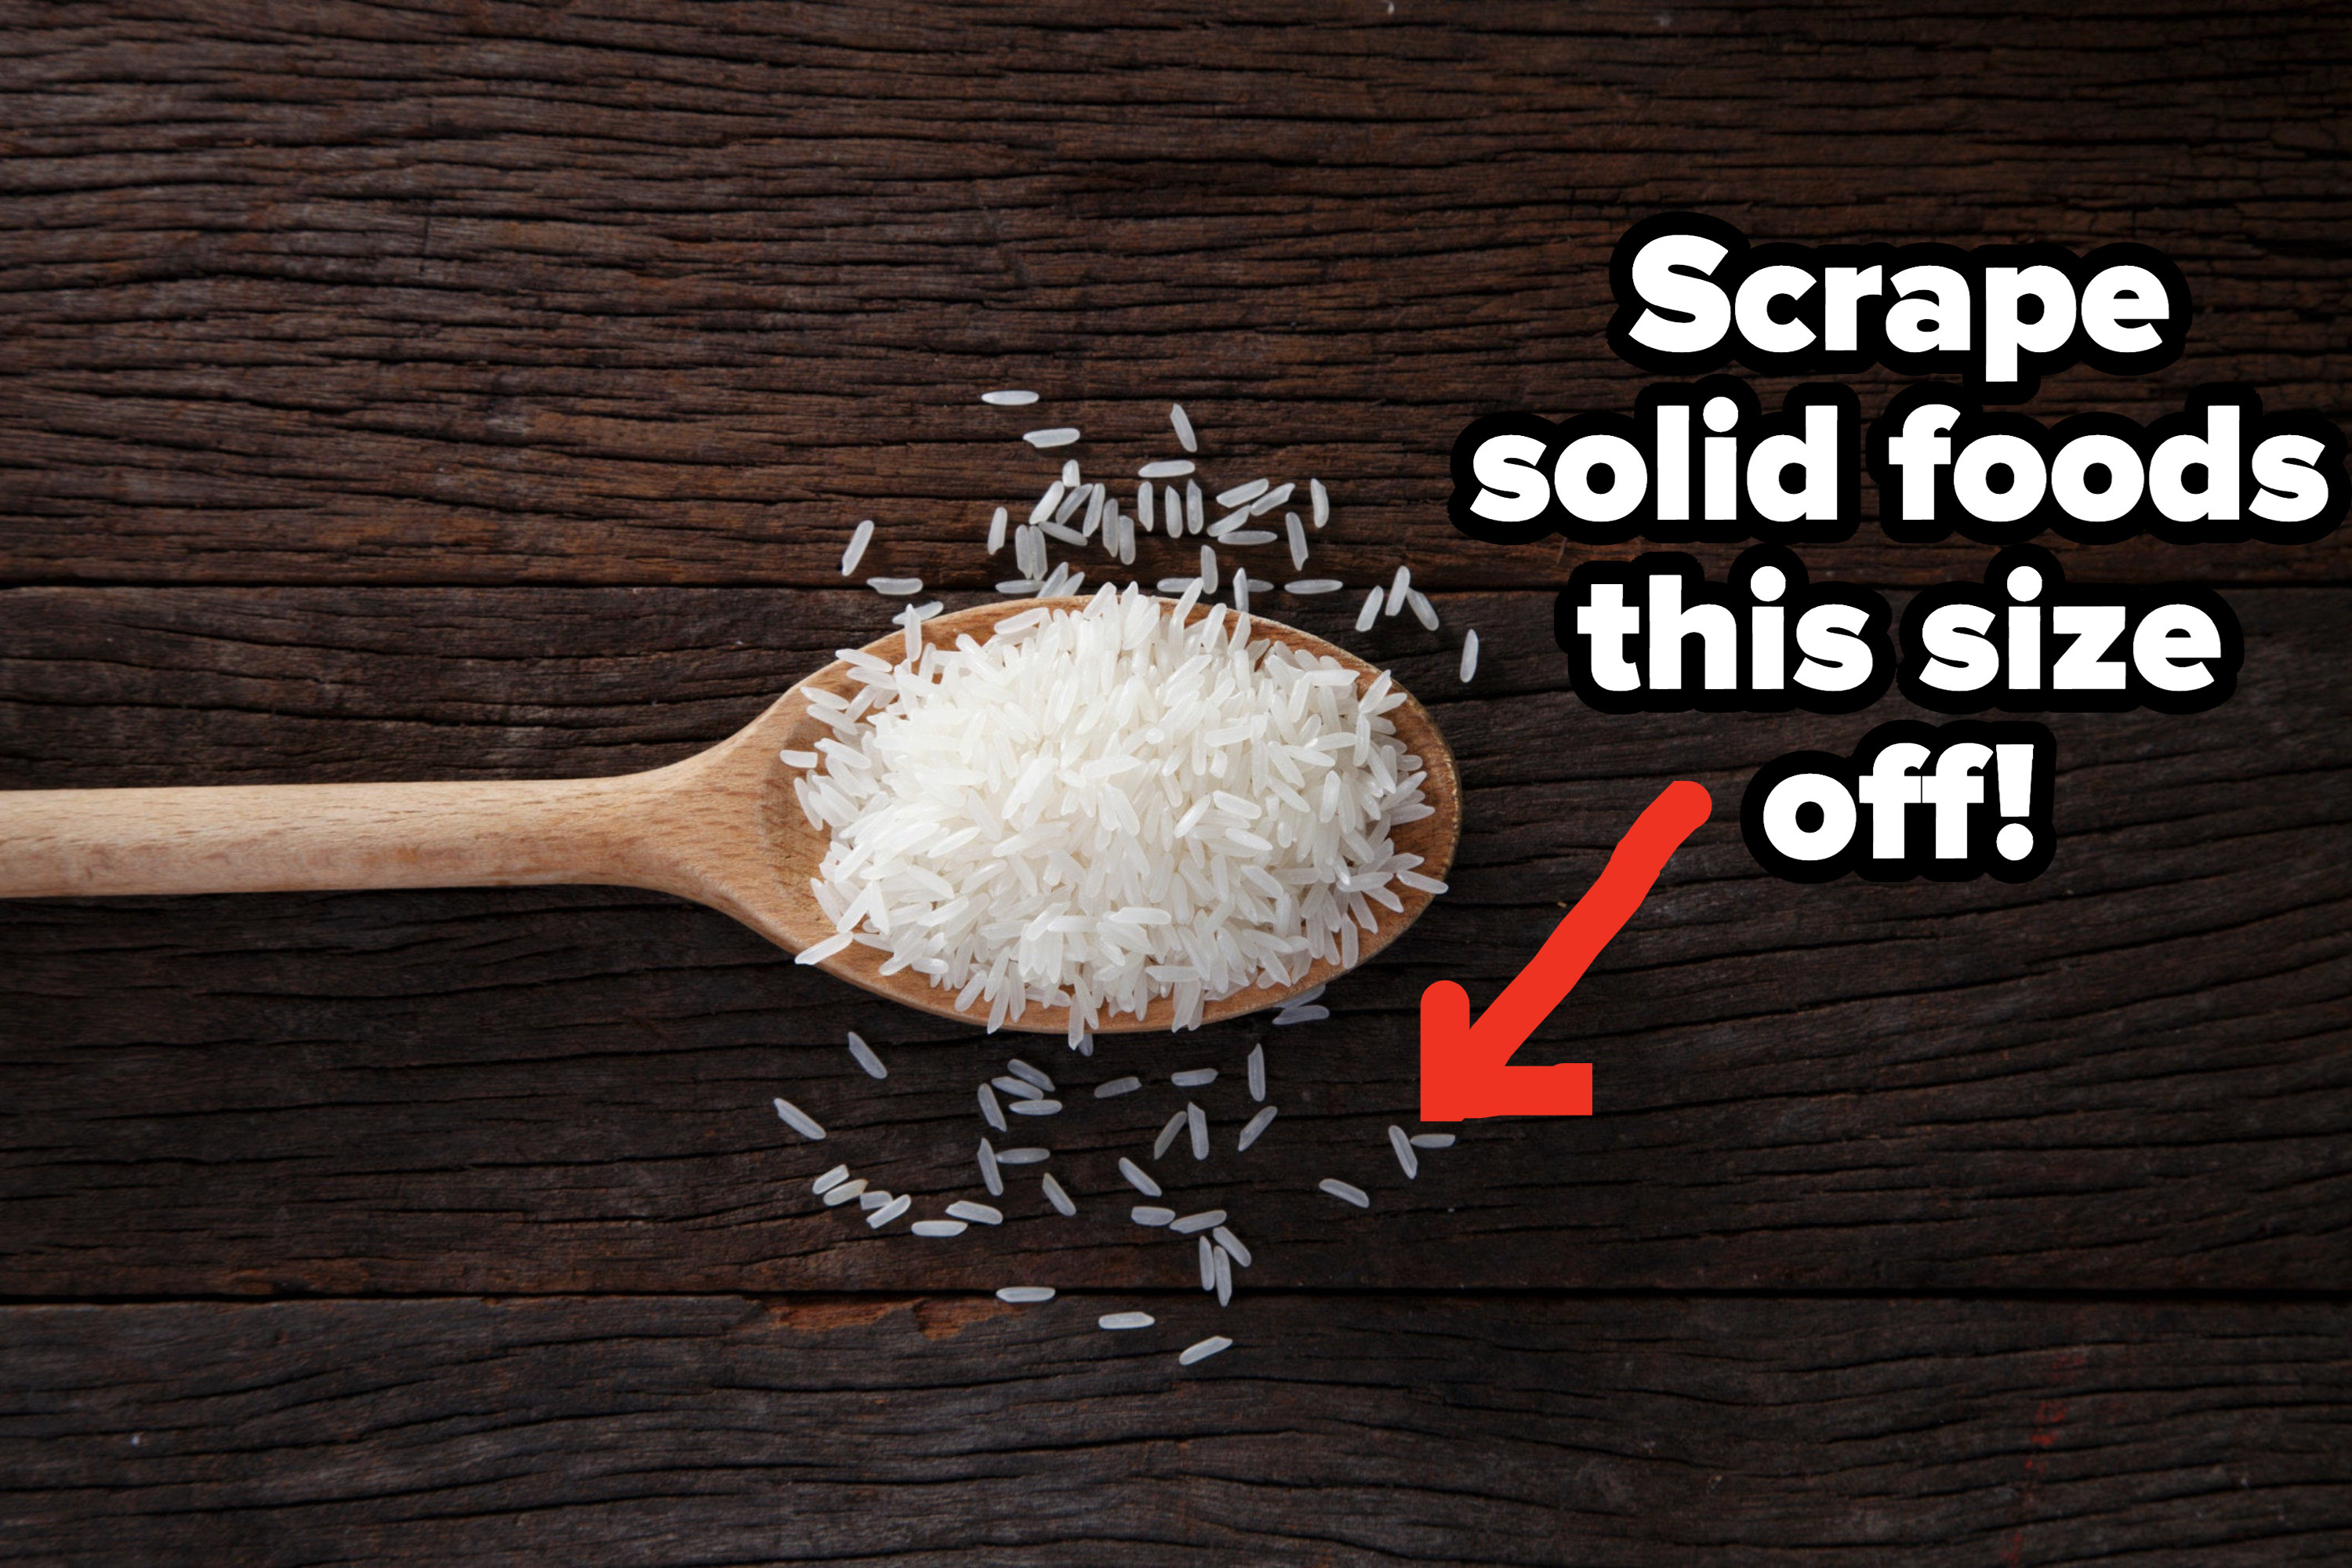 Scrape solid foods this size off! with an arrow pointing to grains of rice